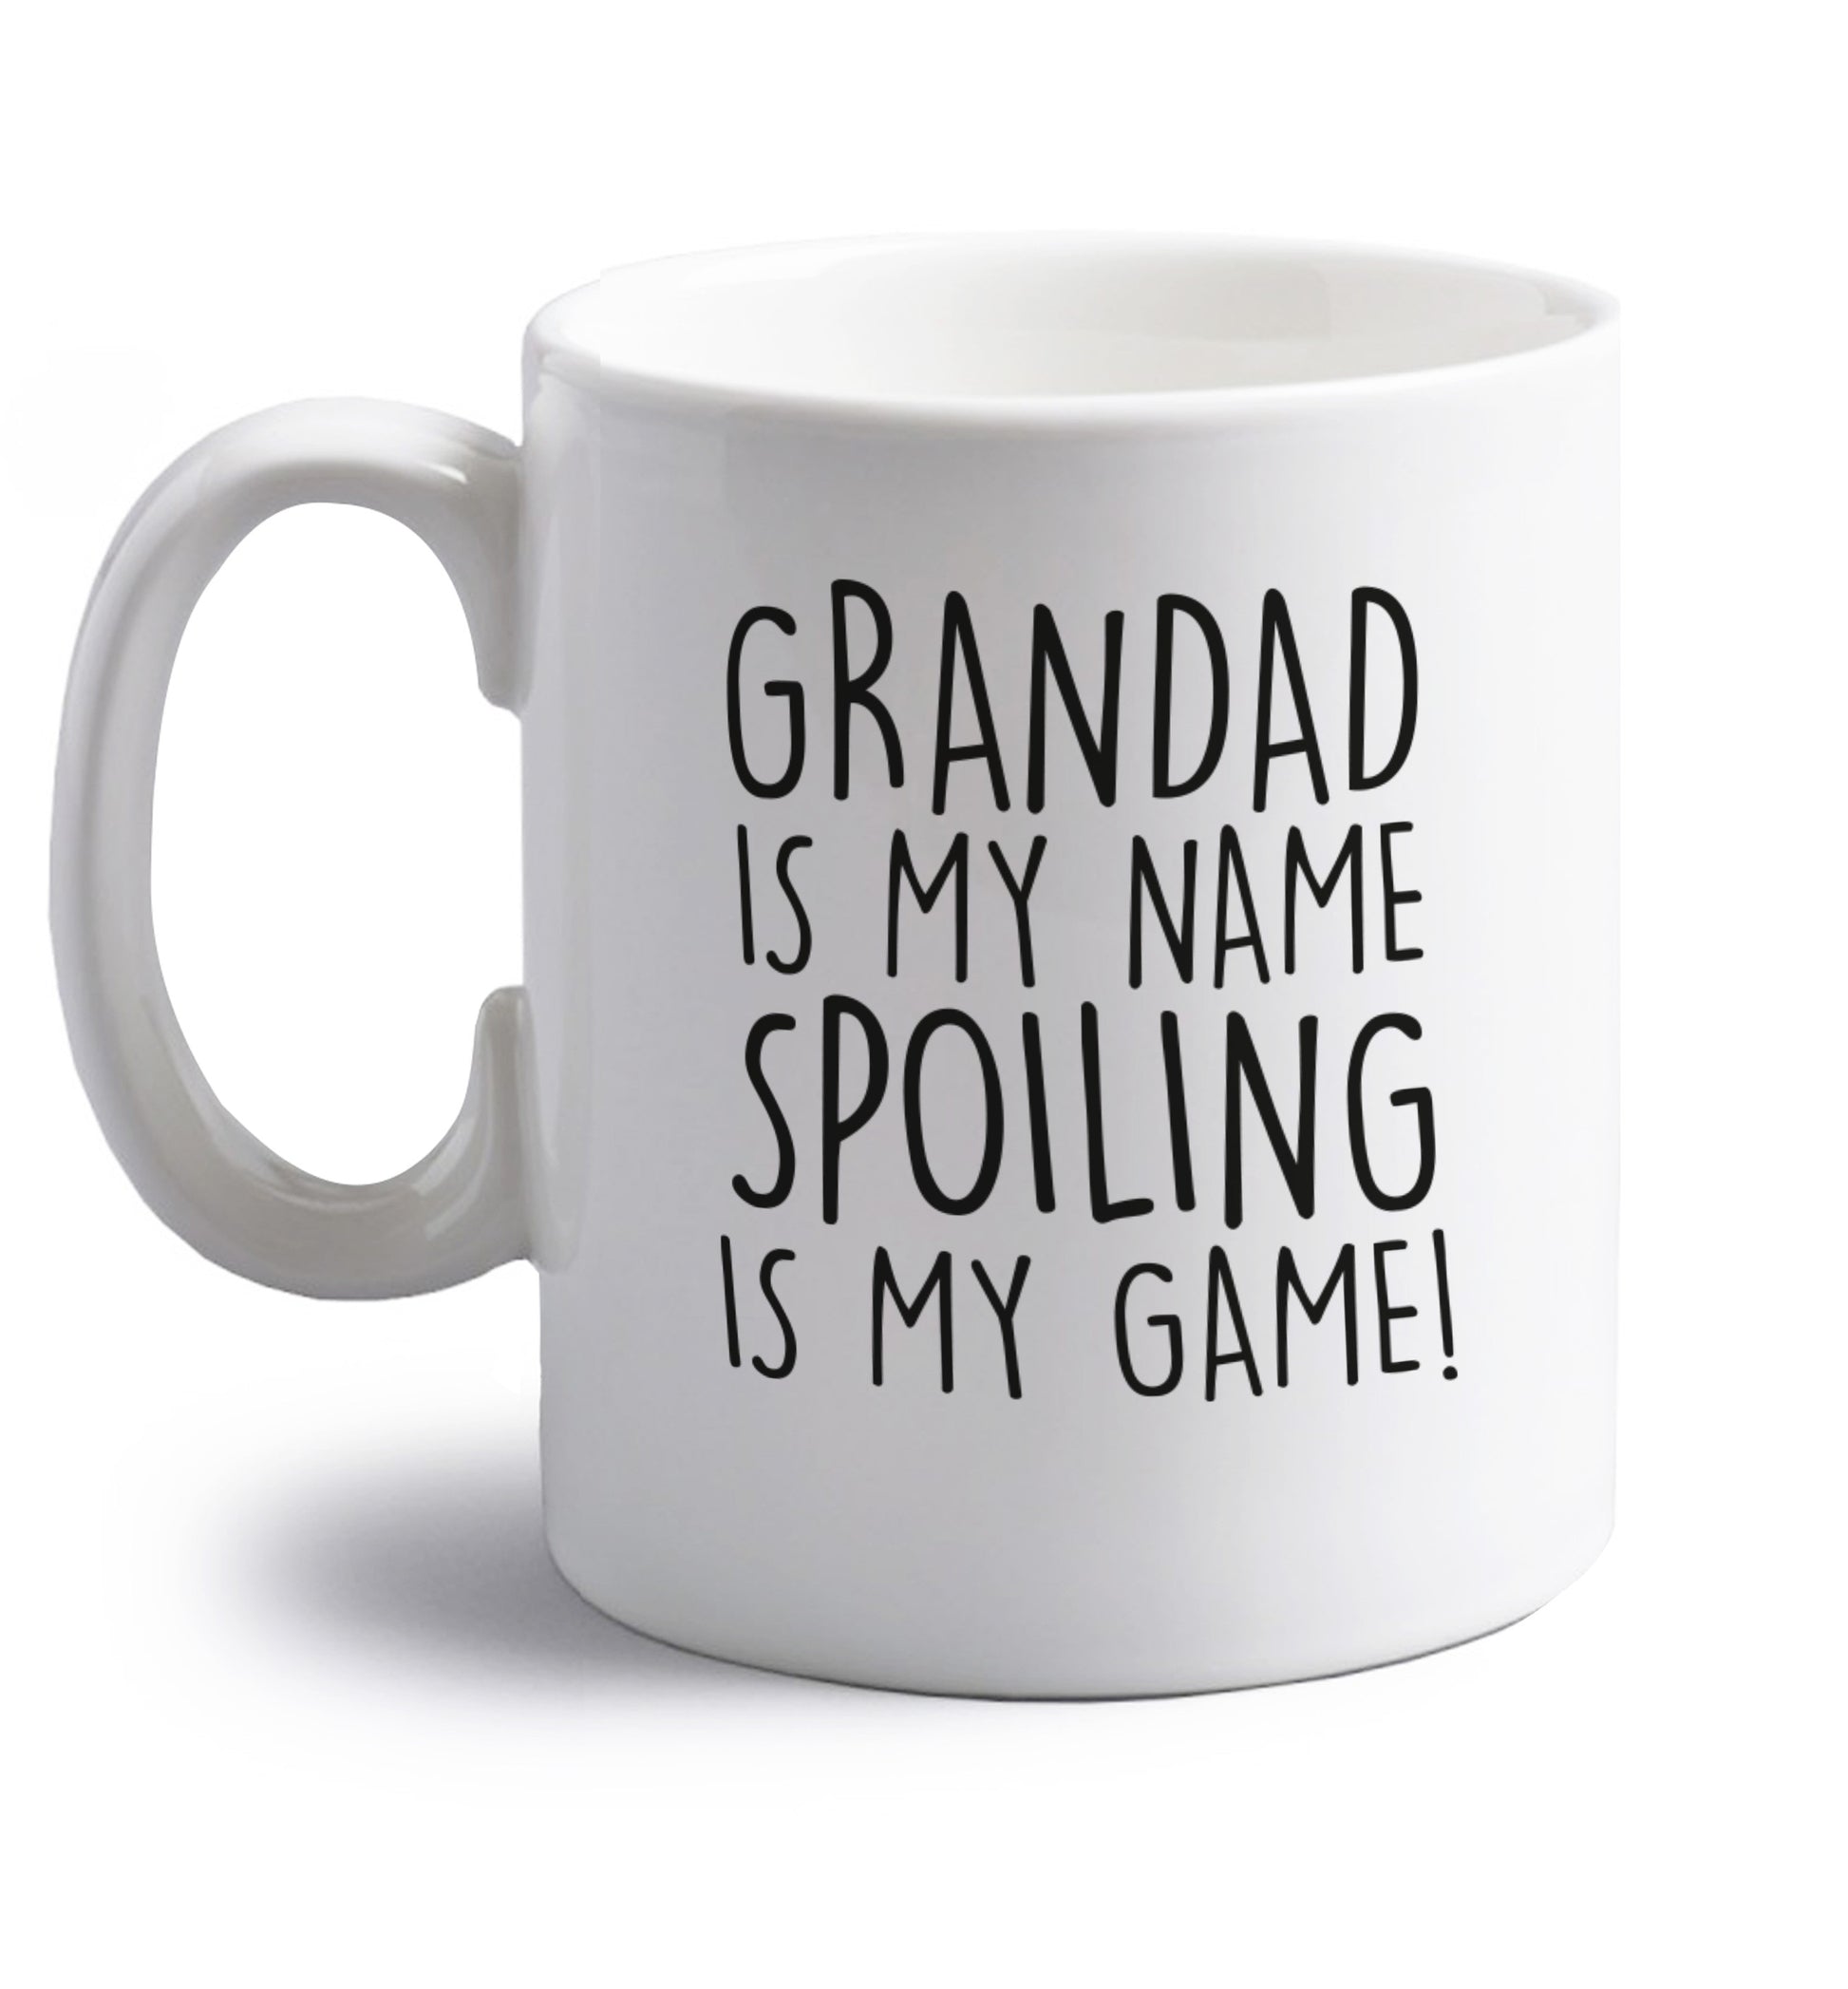 Grandad is my name, spoiling is my game right handed white ceramic mug 